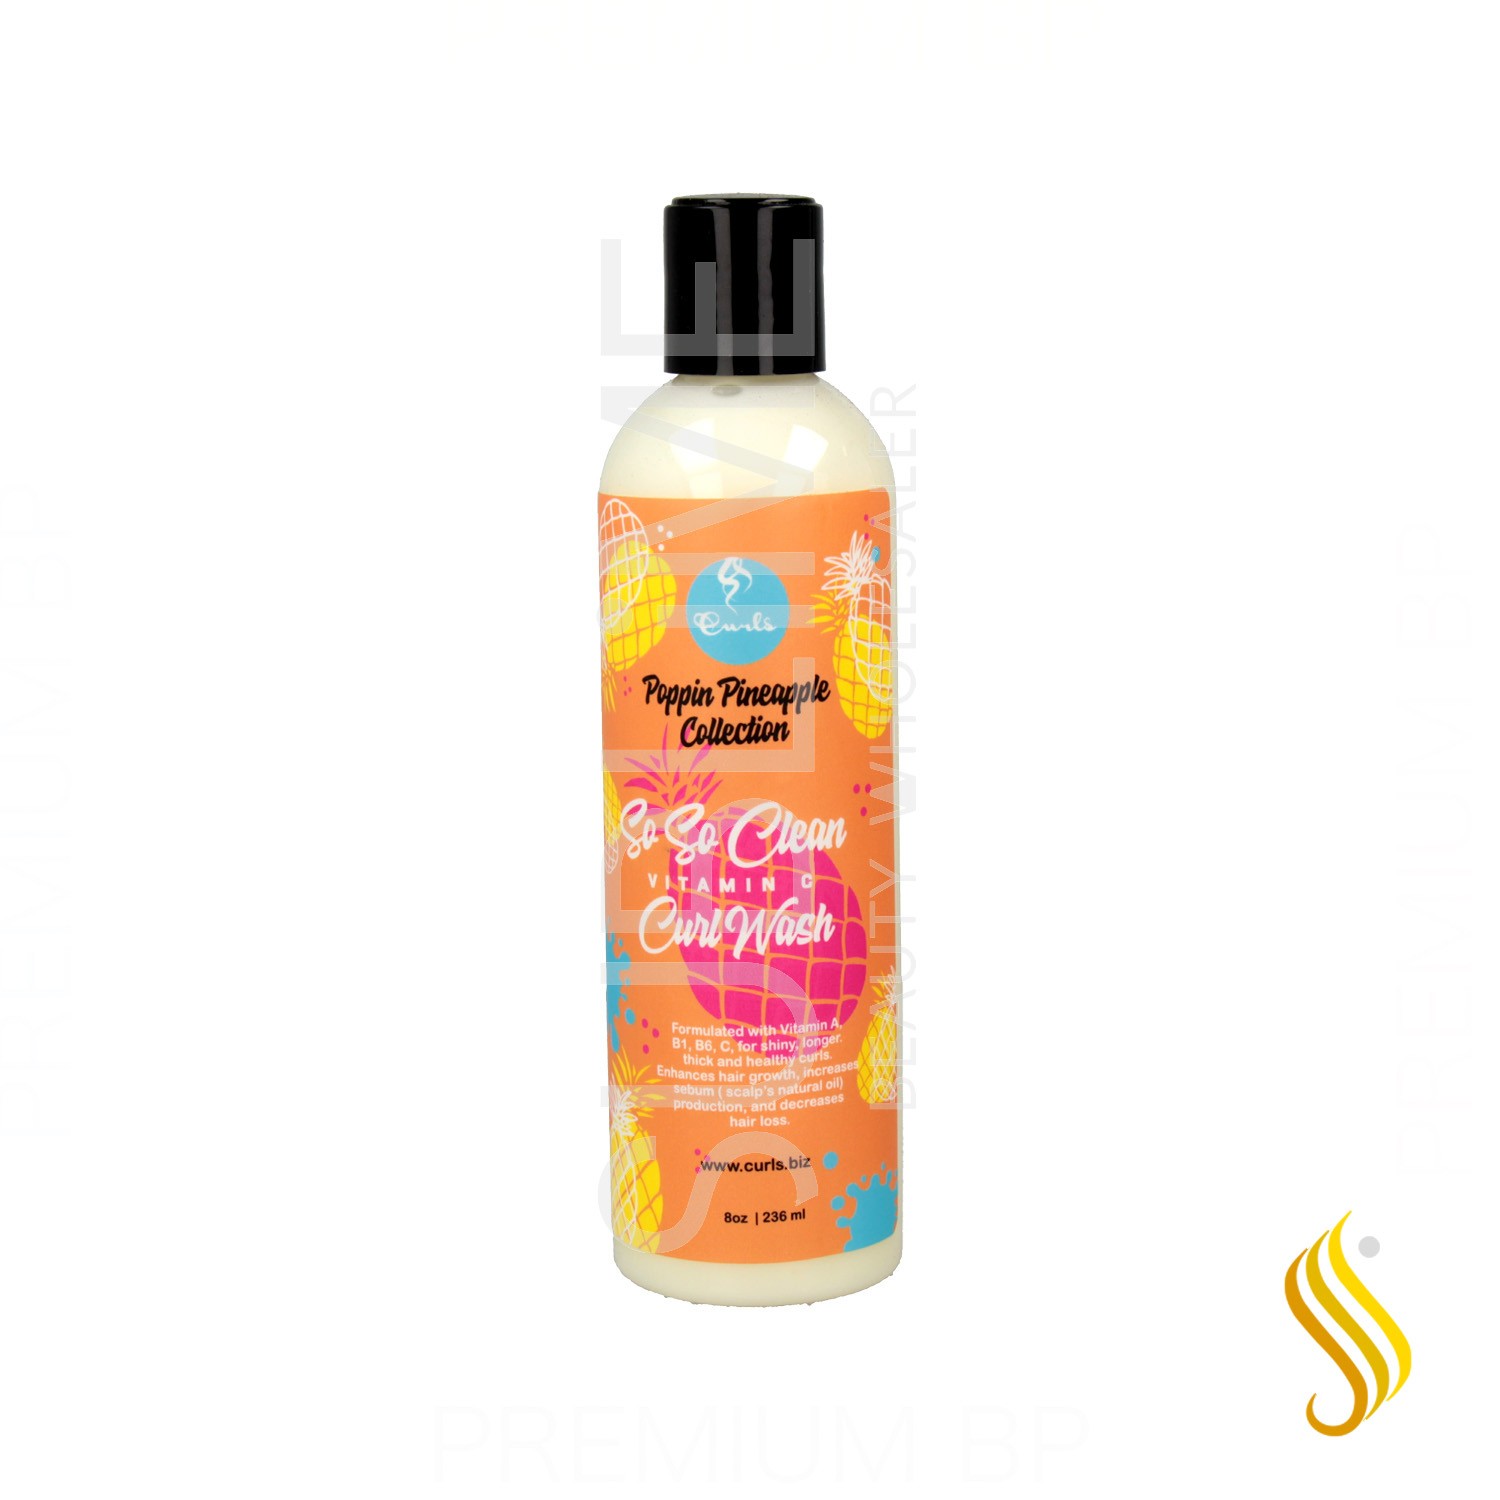 Curls Poppin Pineapple Collection So So Clean Curl Wash 236 ml